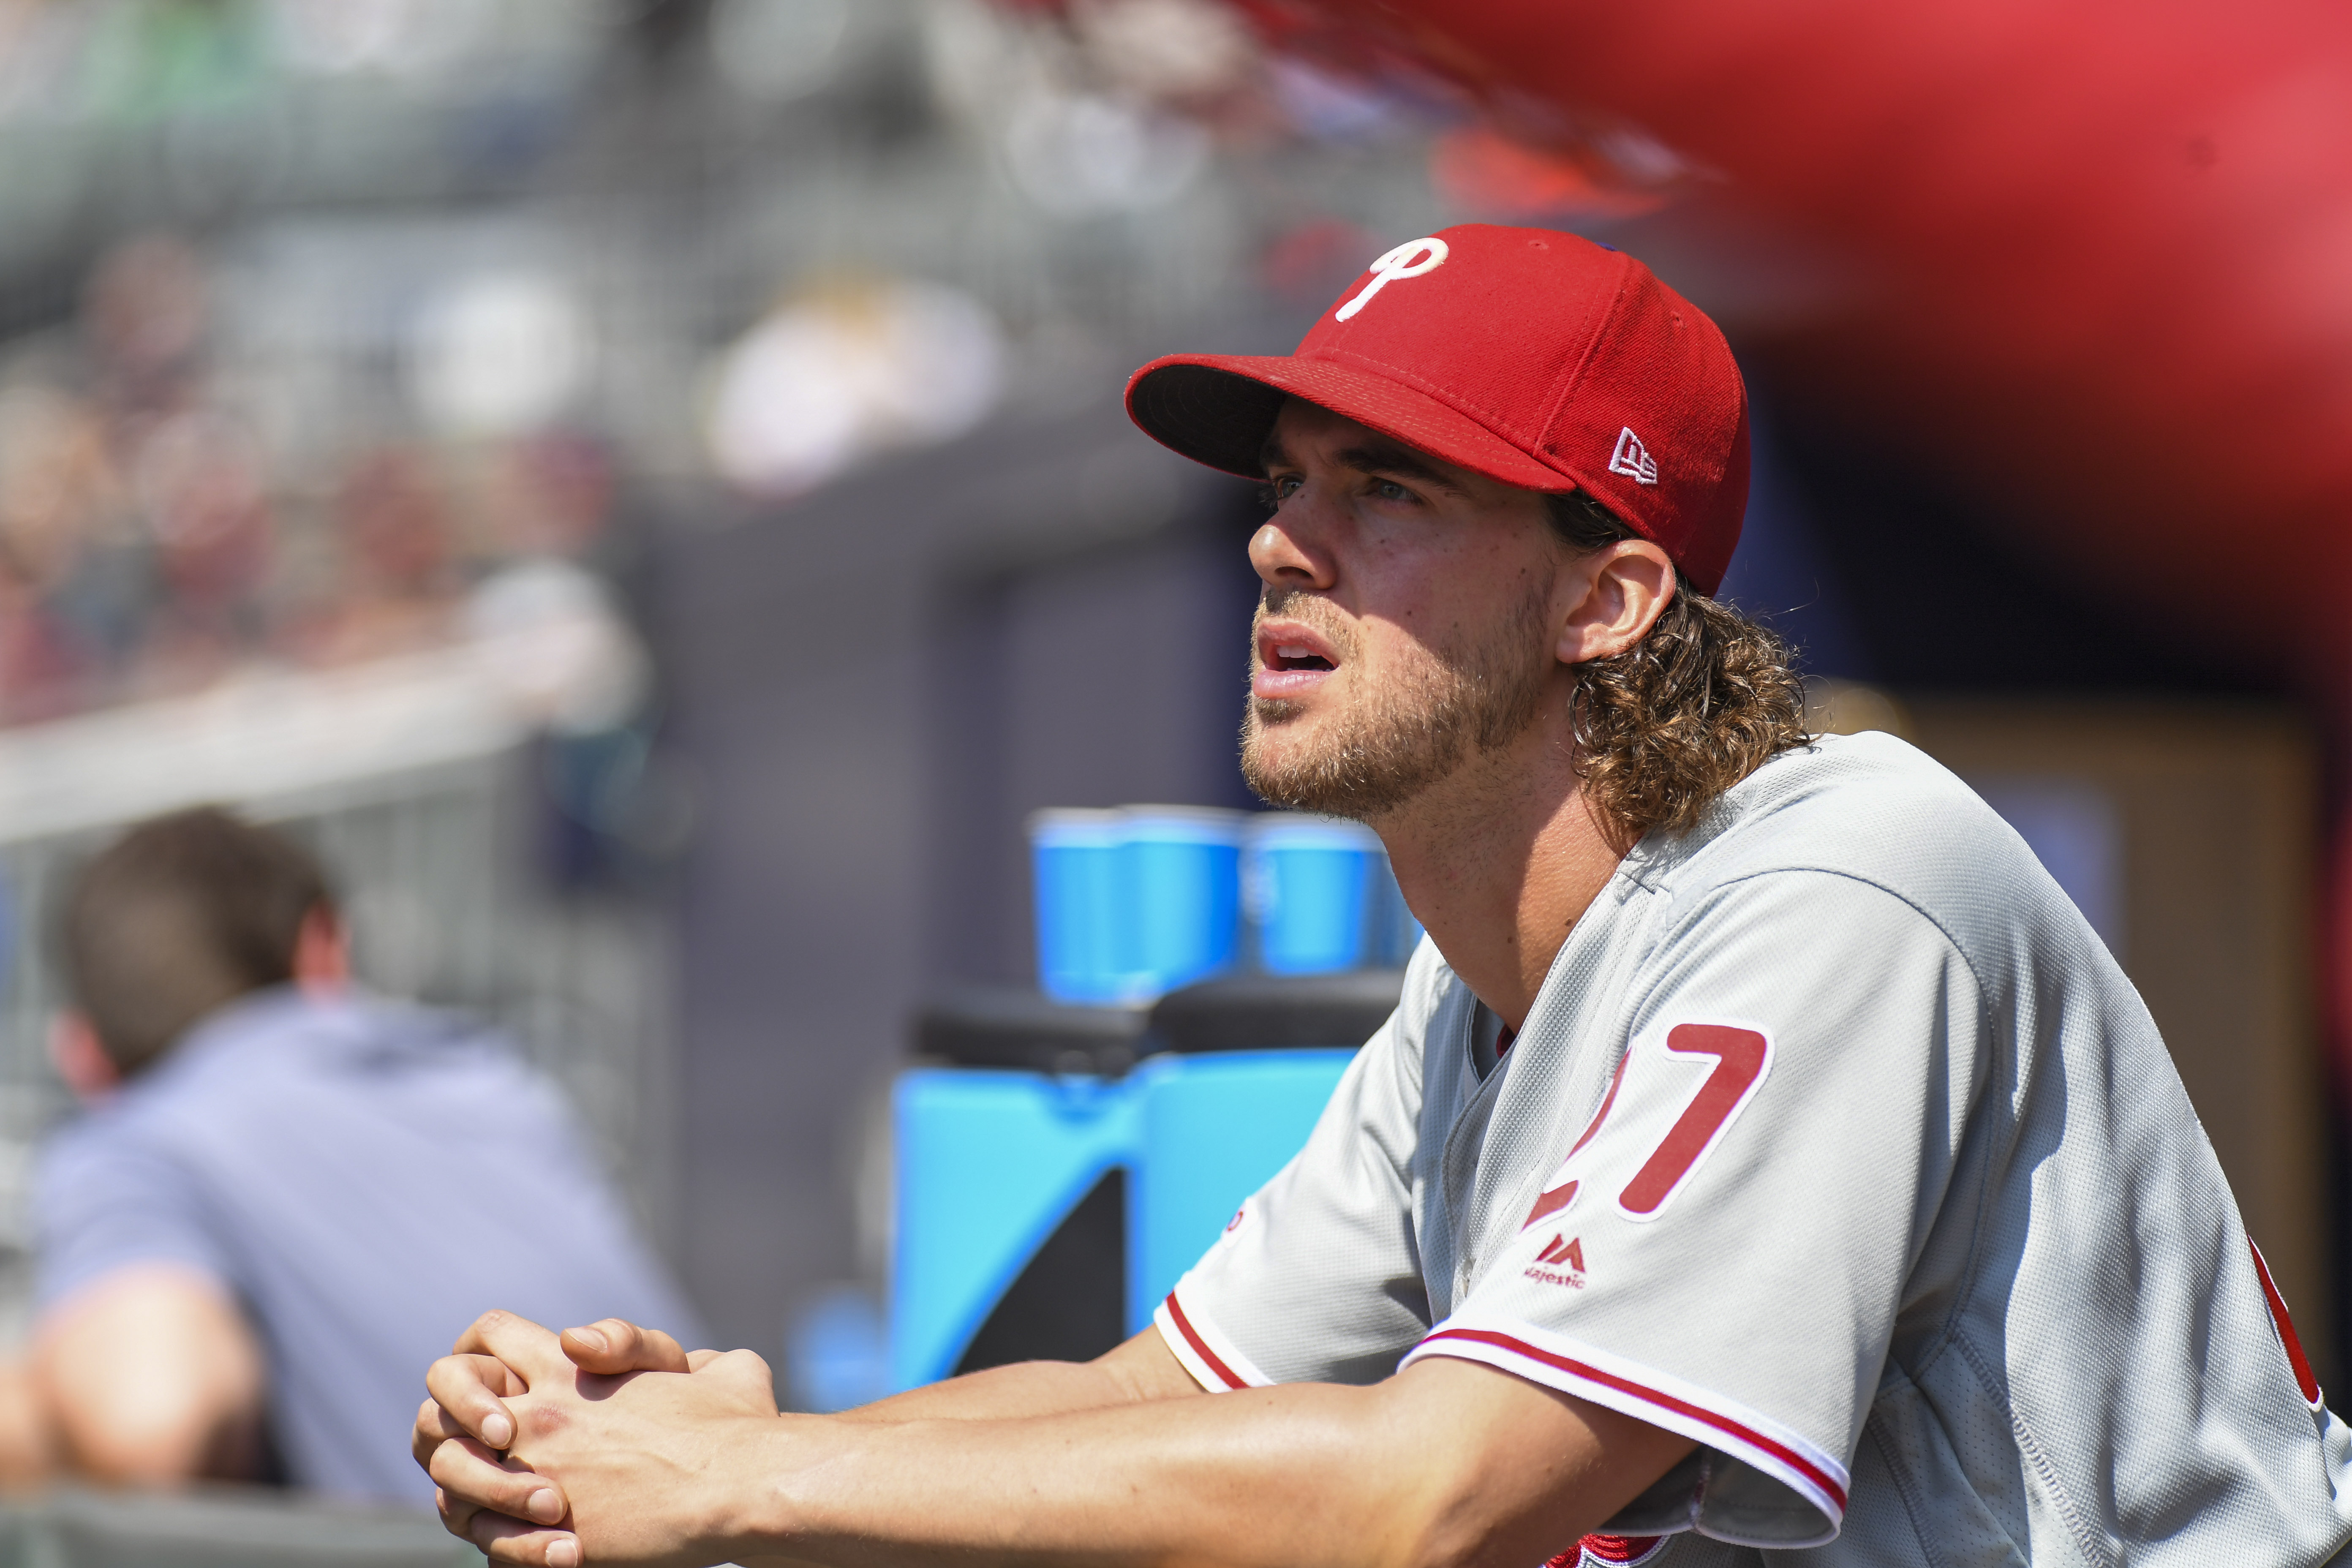 Aaron Nola needed to fail to become the potential All-Star he is in 2018, Archive